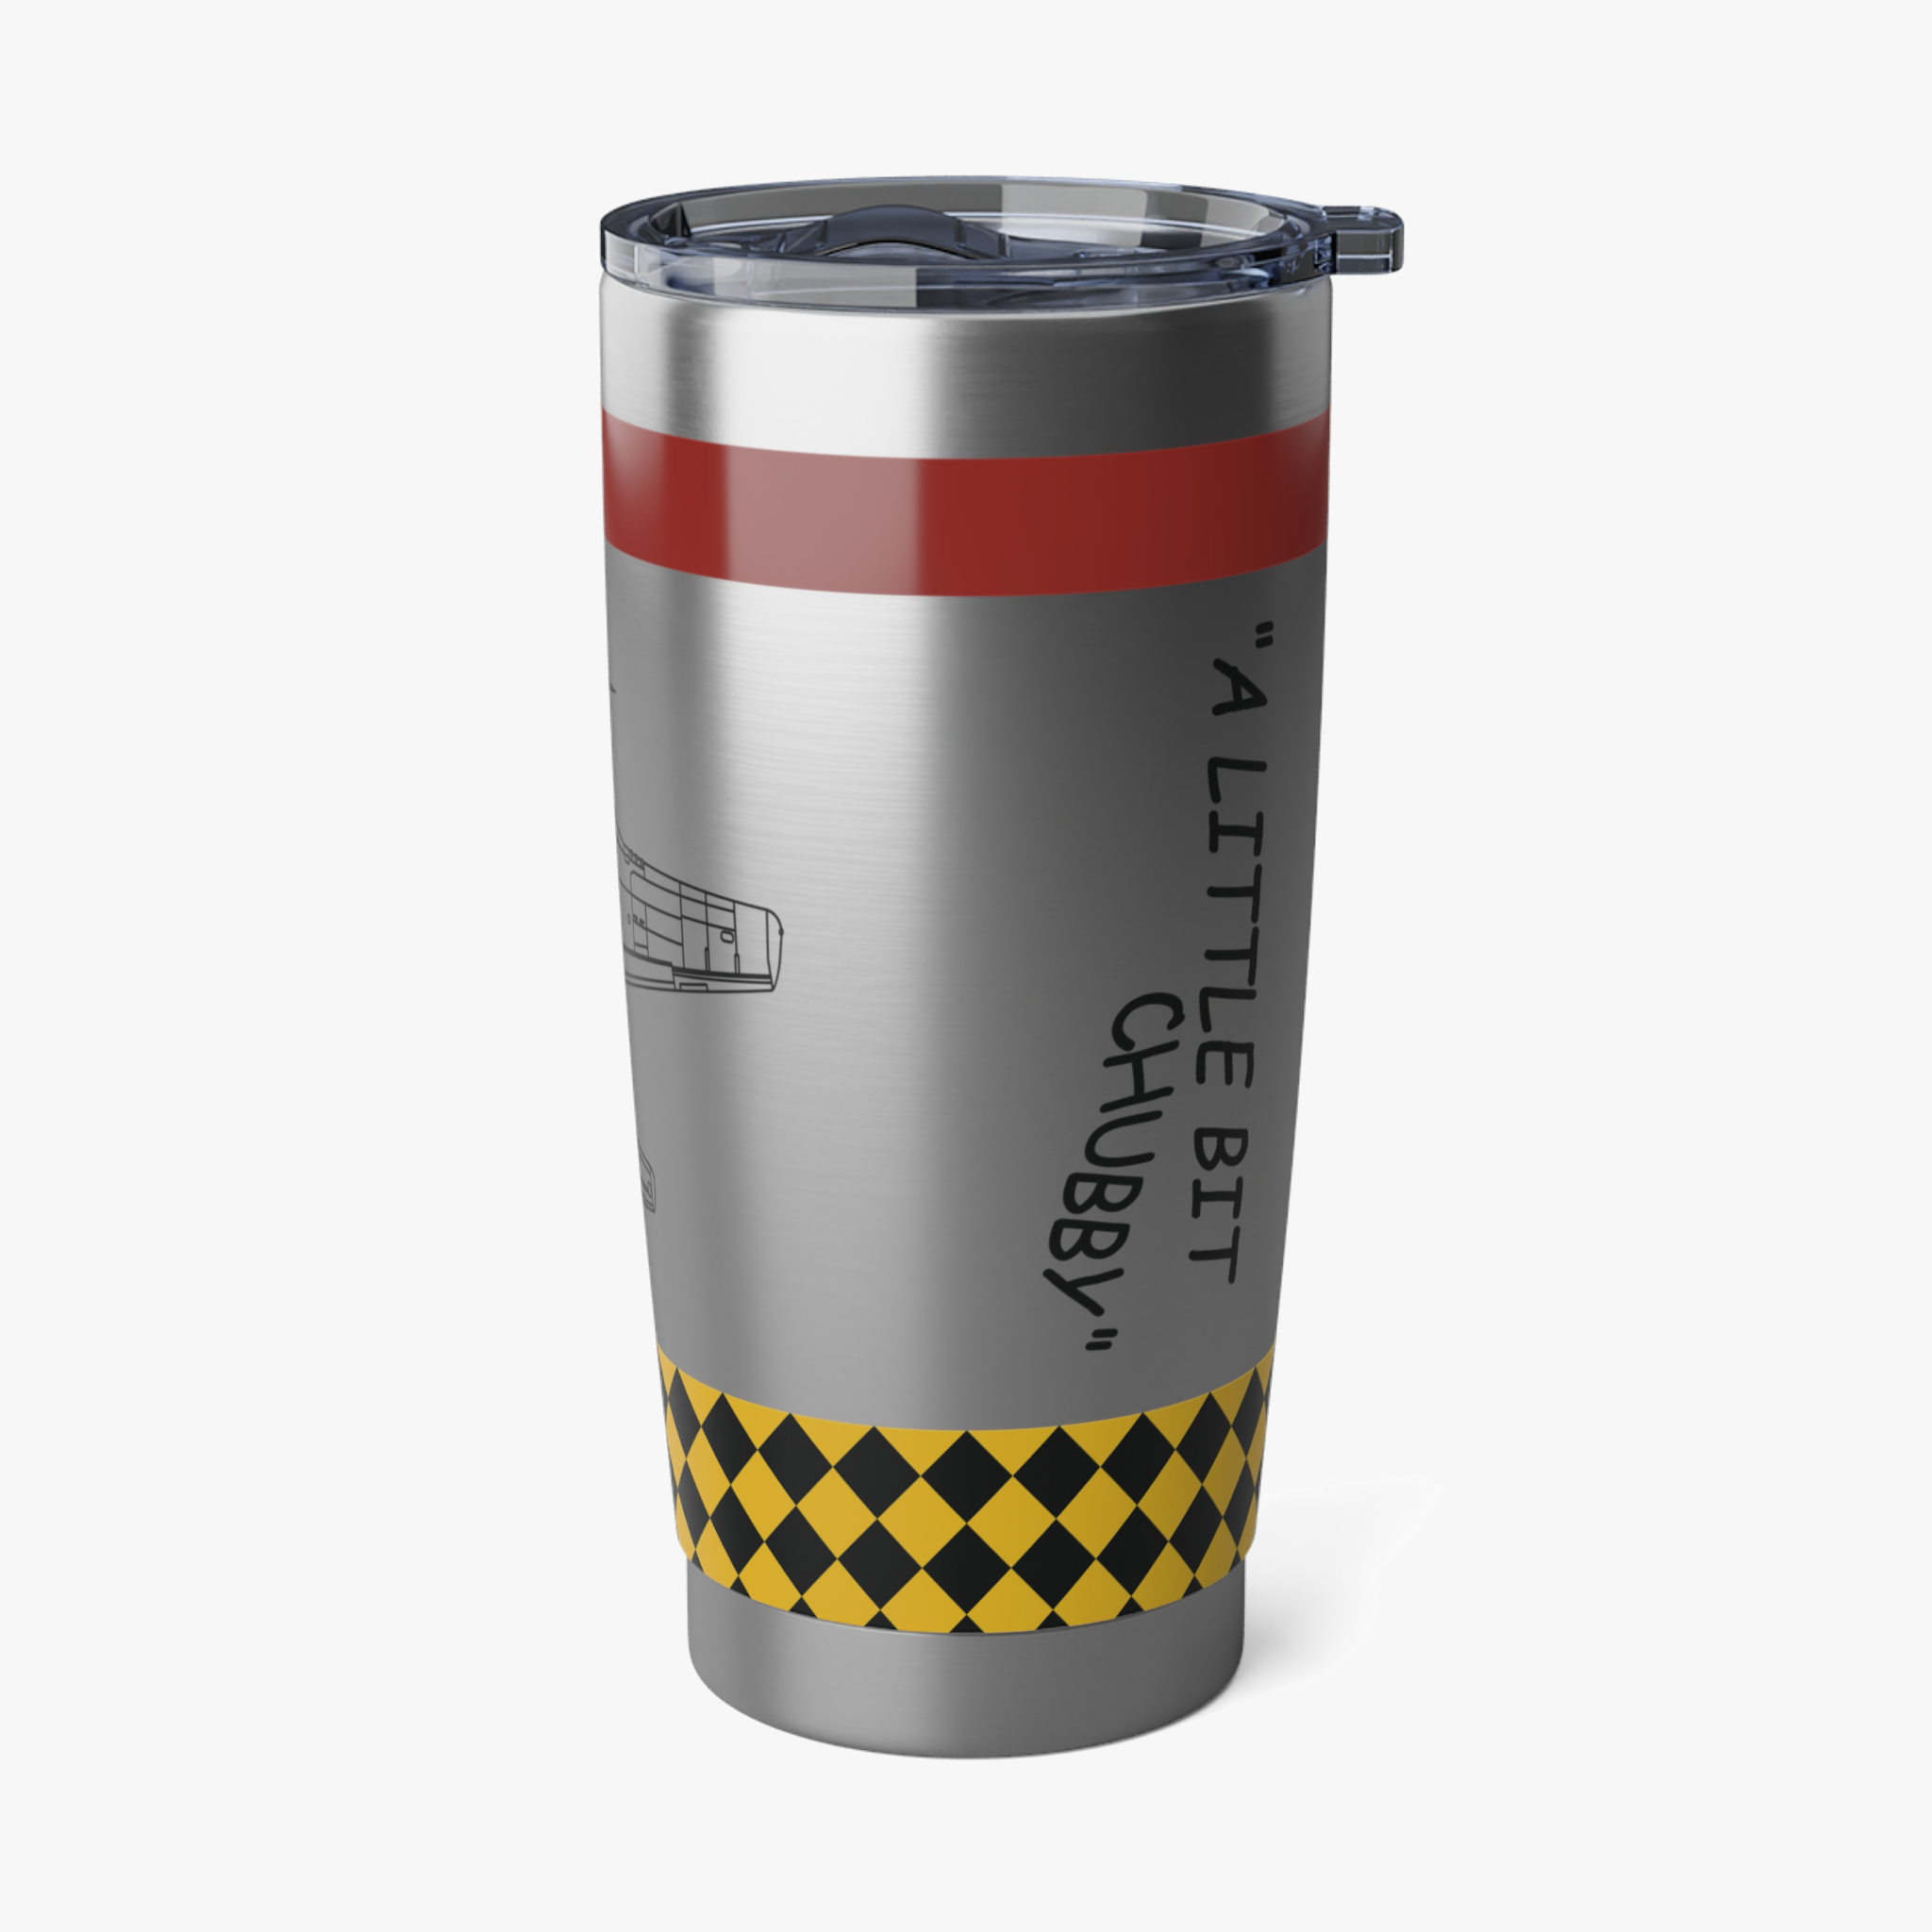 P-51 "A Little Bit Chubby" Inspired 20oz (590ml) Stainless Steel Tumbler